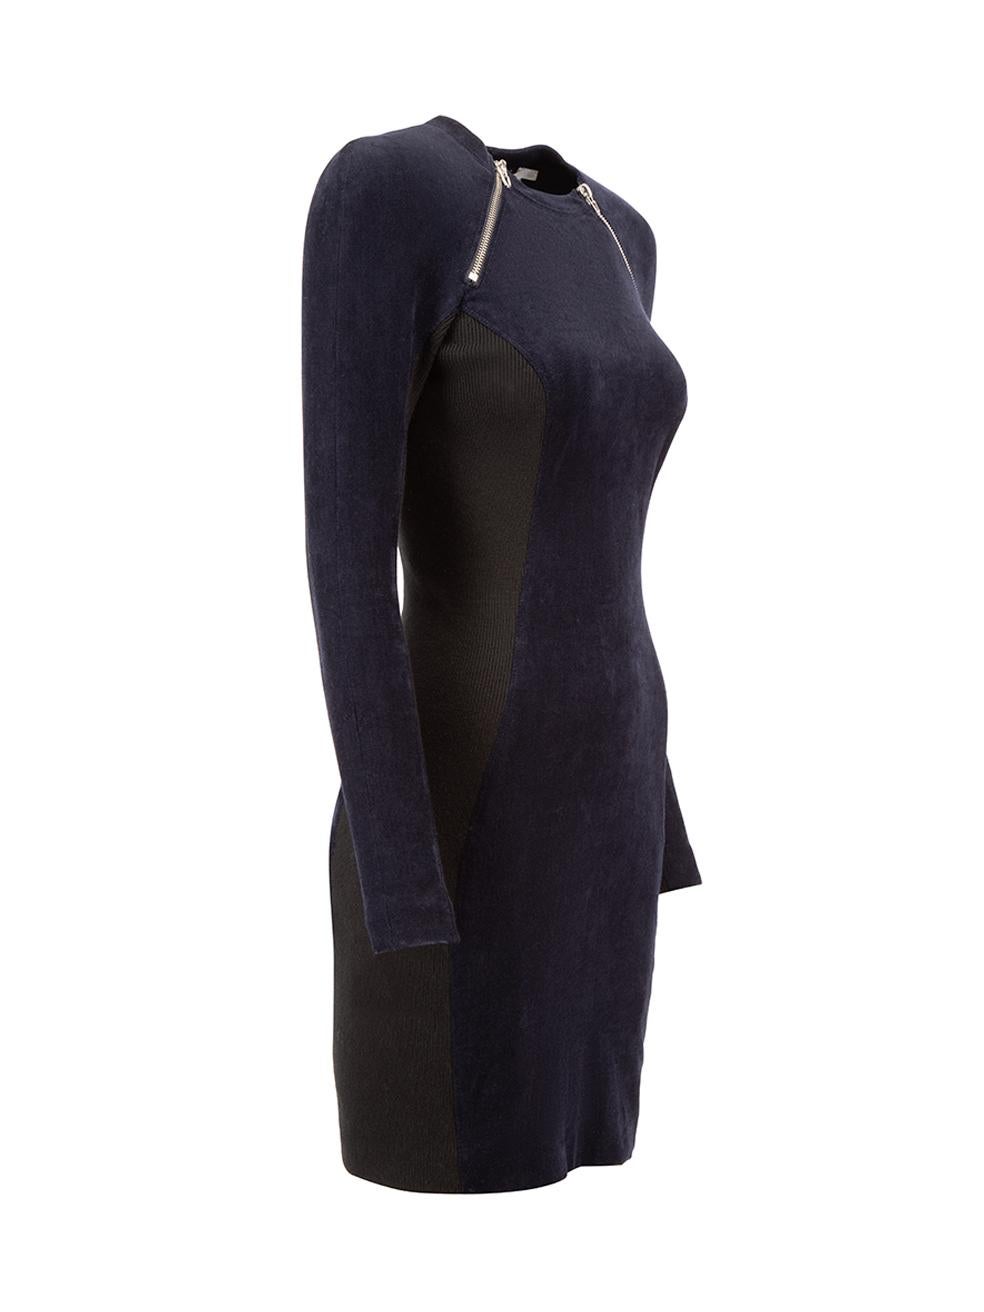 CONDITION is Very good. Minimal wear to dress is evident. Minimal wear to long pile fabric composition on this used T by Alexander Wang designer resale item.



Details


Navy

Two tone

Cotton

Long sleeve mini dress

Zipper detail

Round